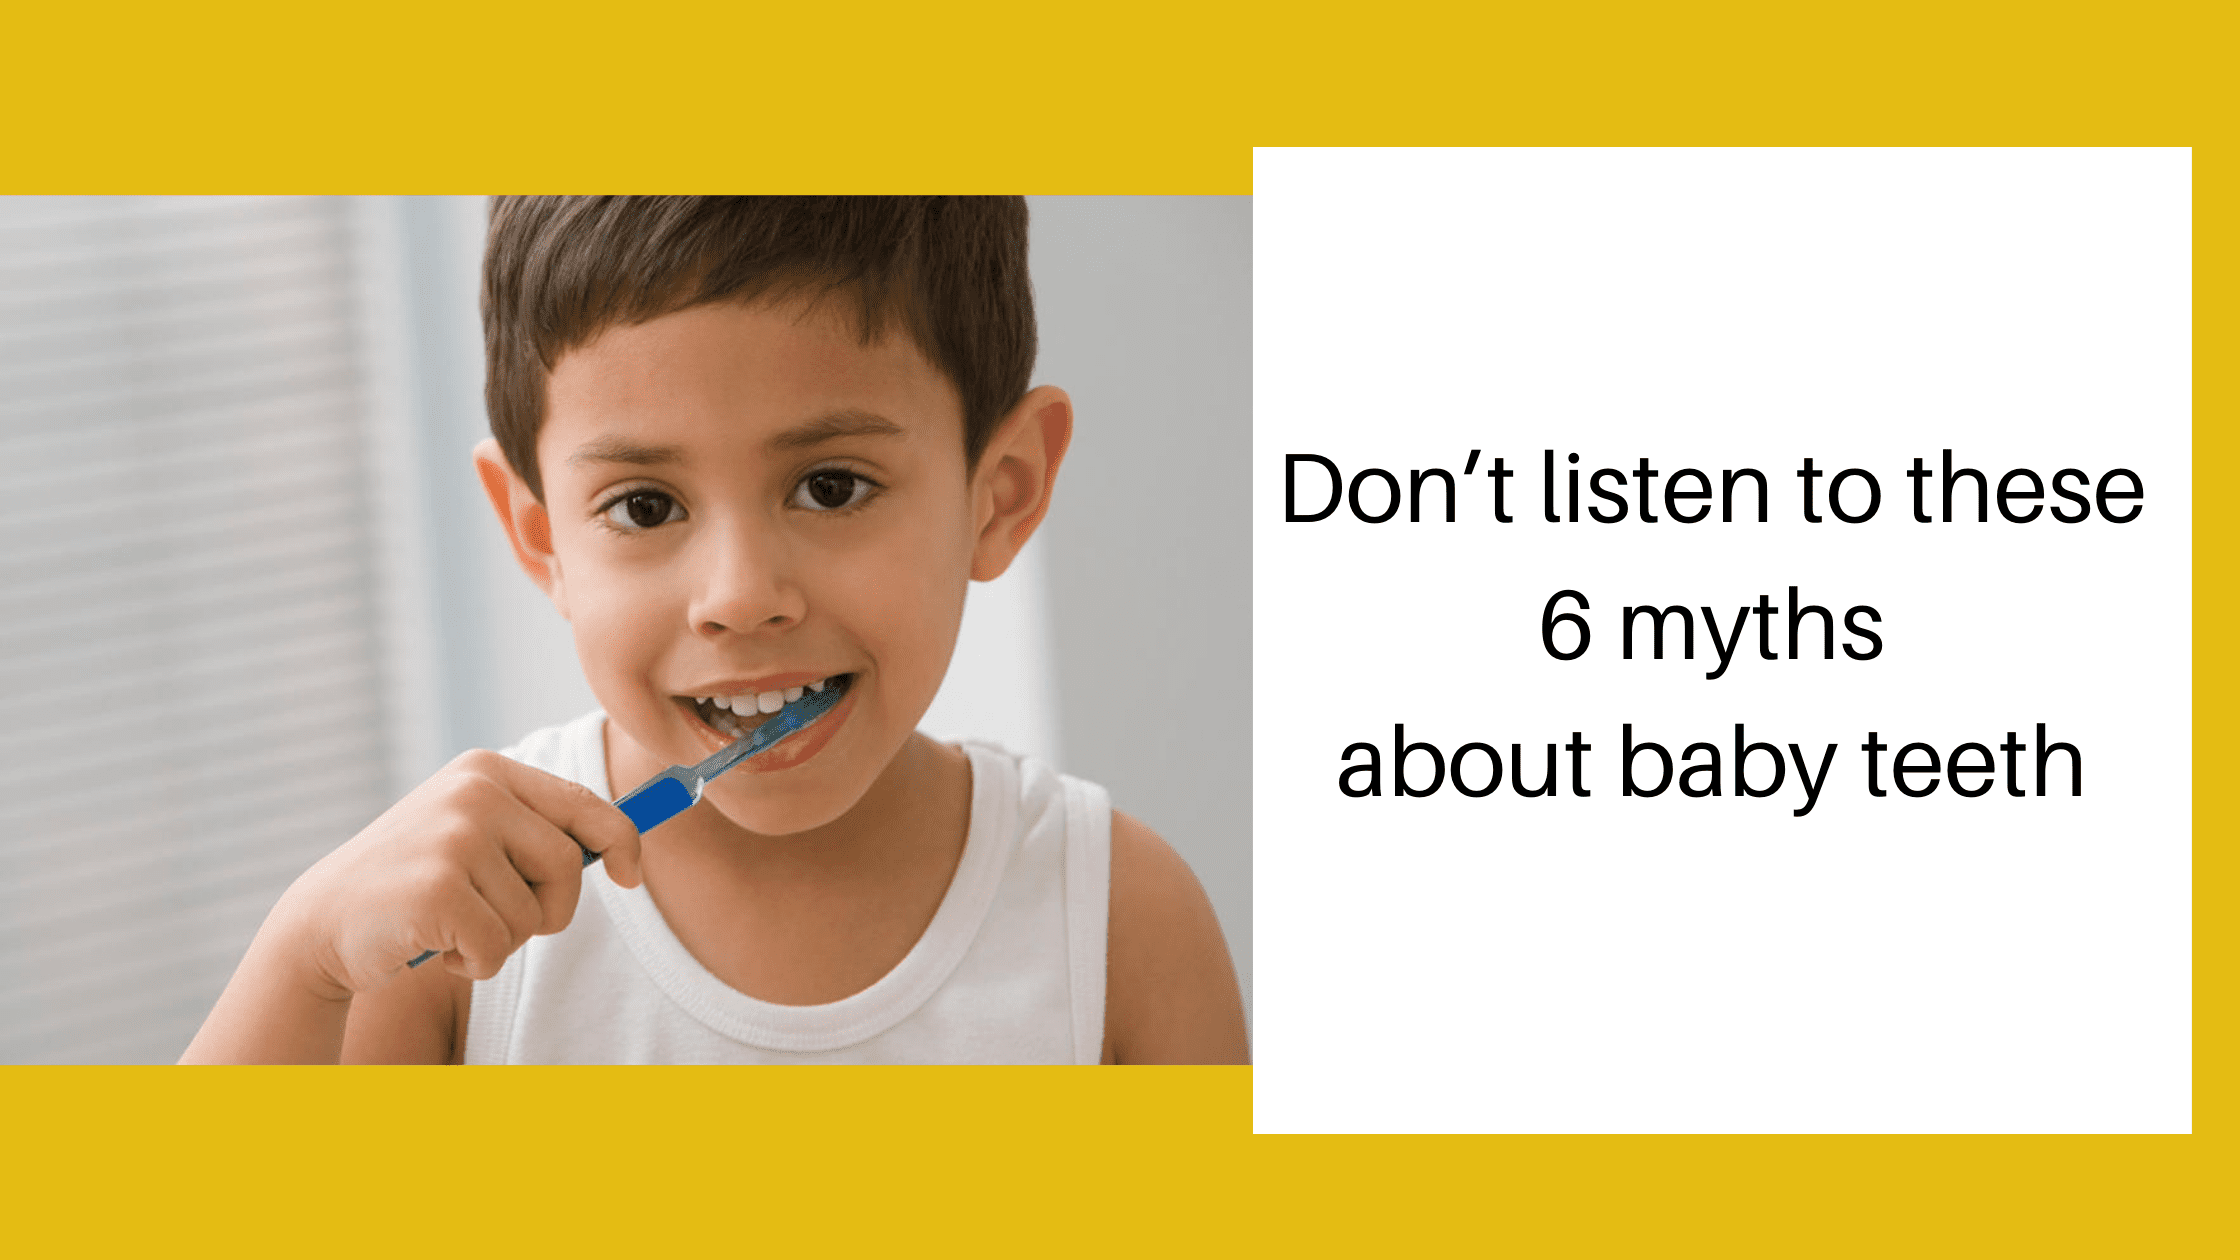 Don’t listen to these 6 myths about baby teeth